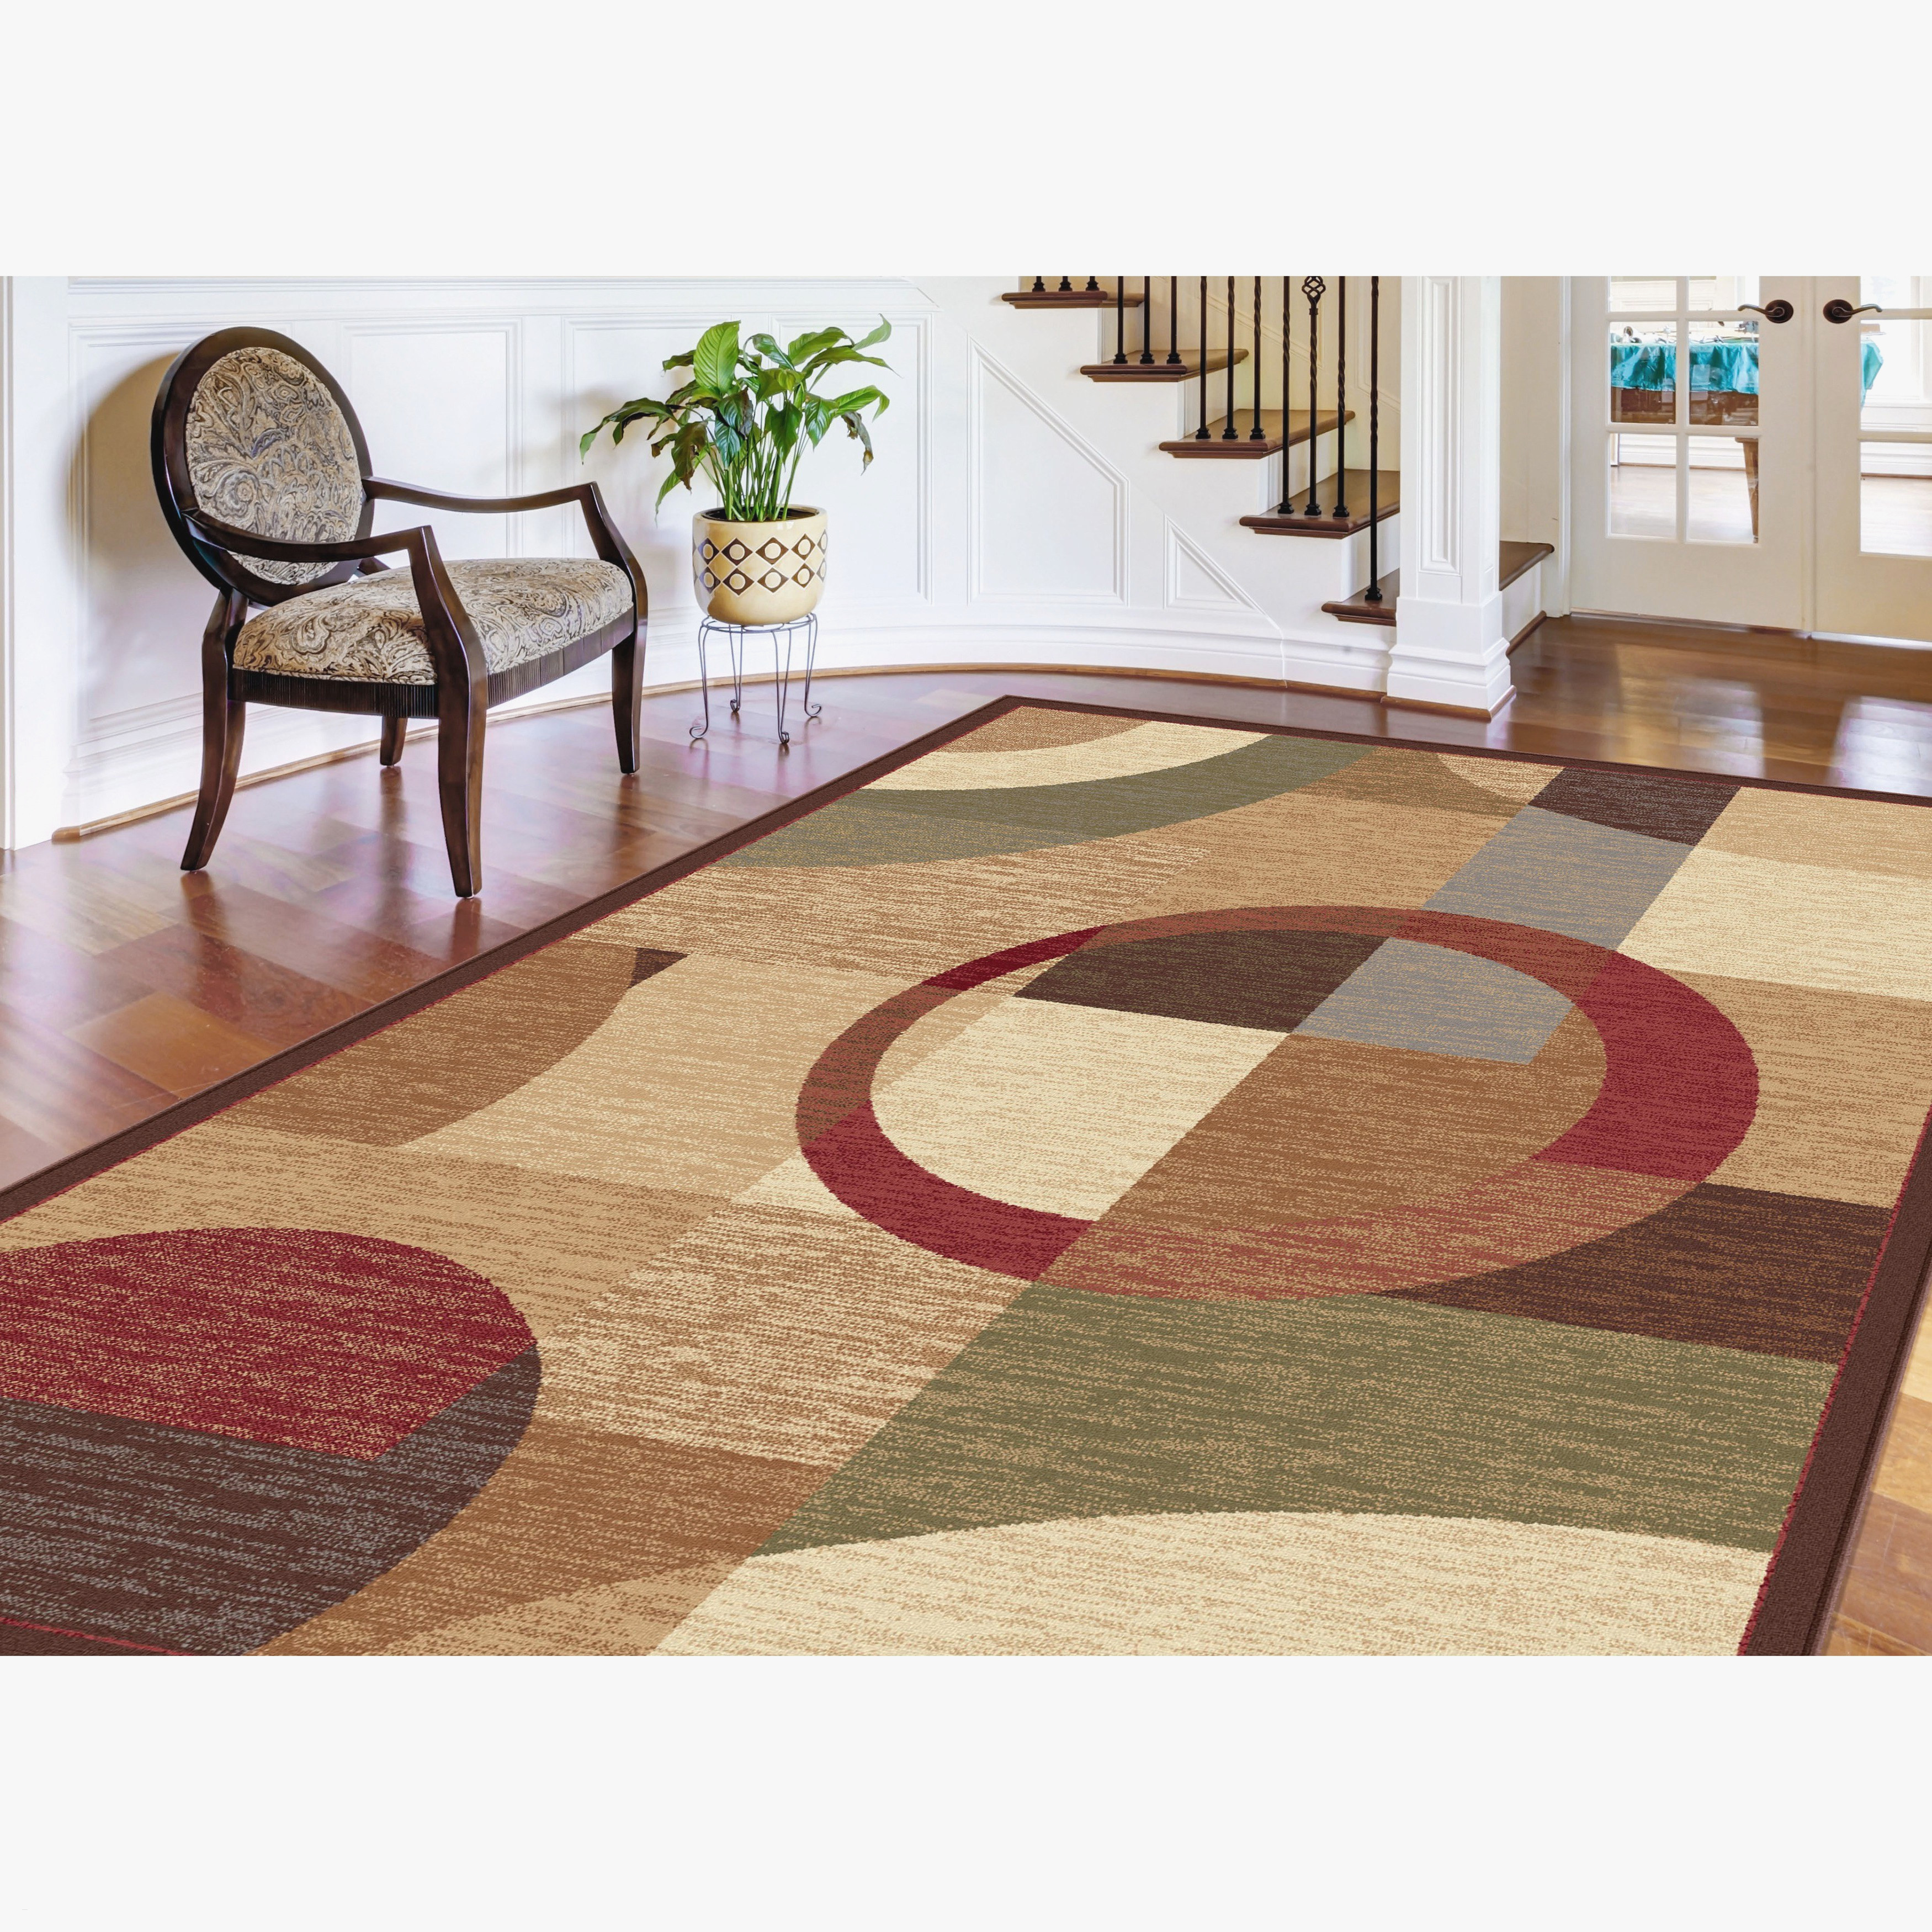 15 Perfect Menards Hardwood Floor Cleaner 2024 free download menards hardwood floor cleaner of outdoor camping rug menards rugs ideas throughout outdoor rugs menards awesome unique 5 7 of depiction